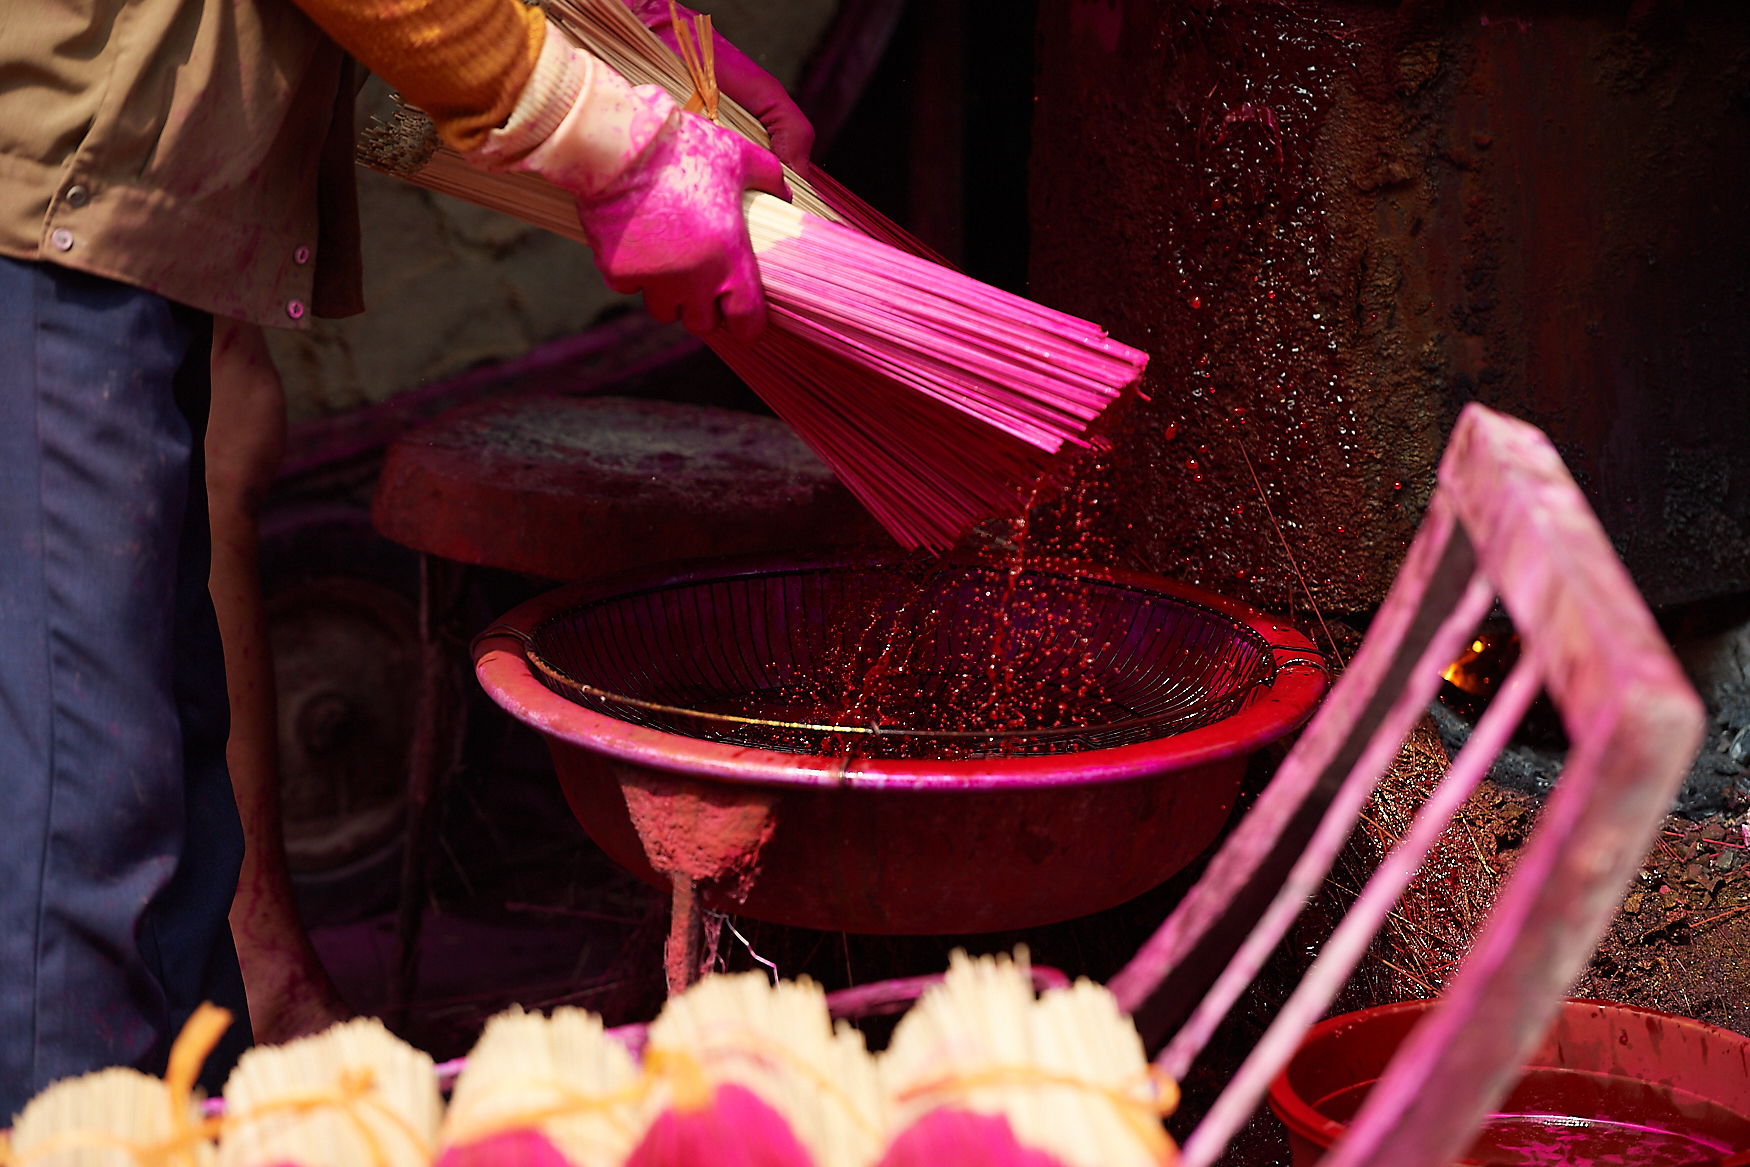 Sticks are being dyed repeatedly until the desired colour is achieved